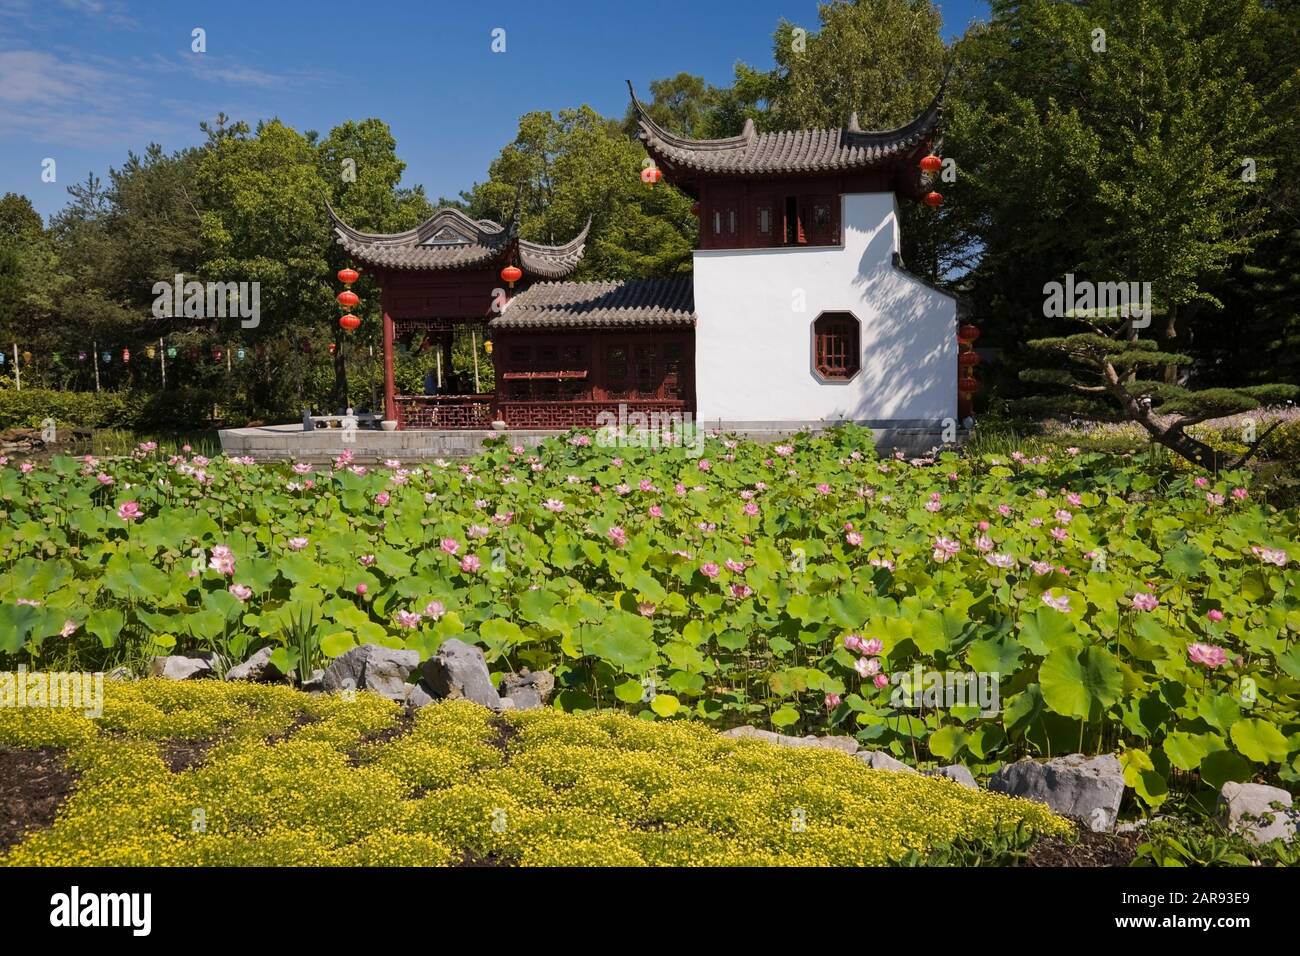 The Stone Boat pavilion in Lotus pond with Nelumbo nucifera - Lotus flowers the Chinese Garden in summer. Montreal Botanical Garden, Quebec, Canada Stock Photo